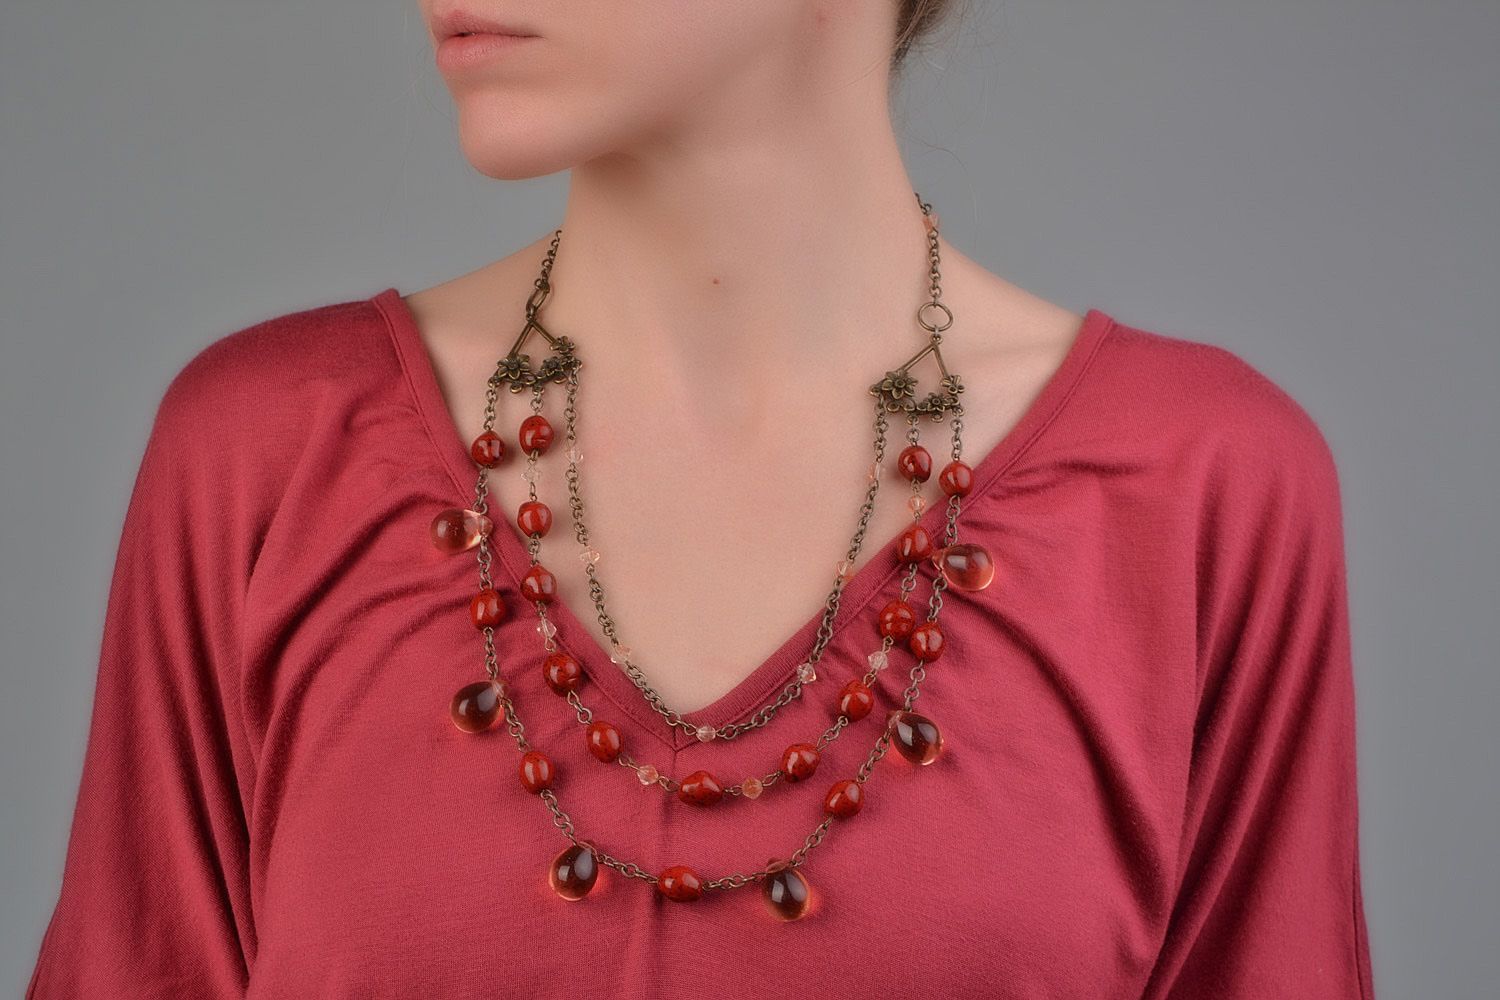 Handmade women's glass and ceramic bead necklace in ethnic style photo 1